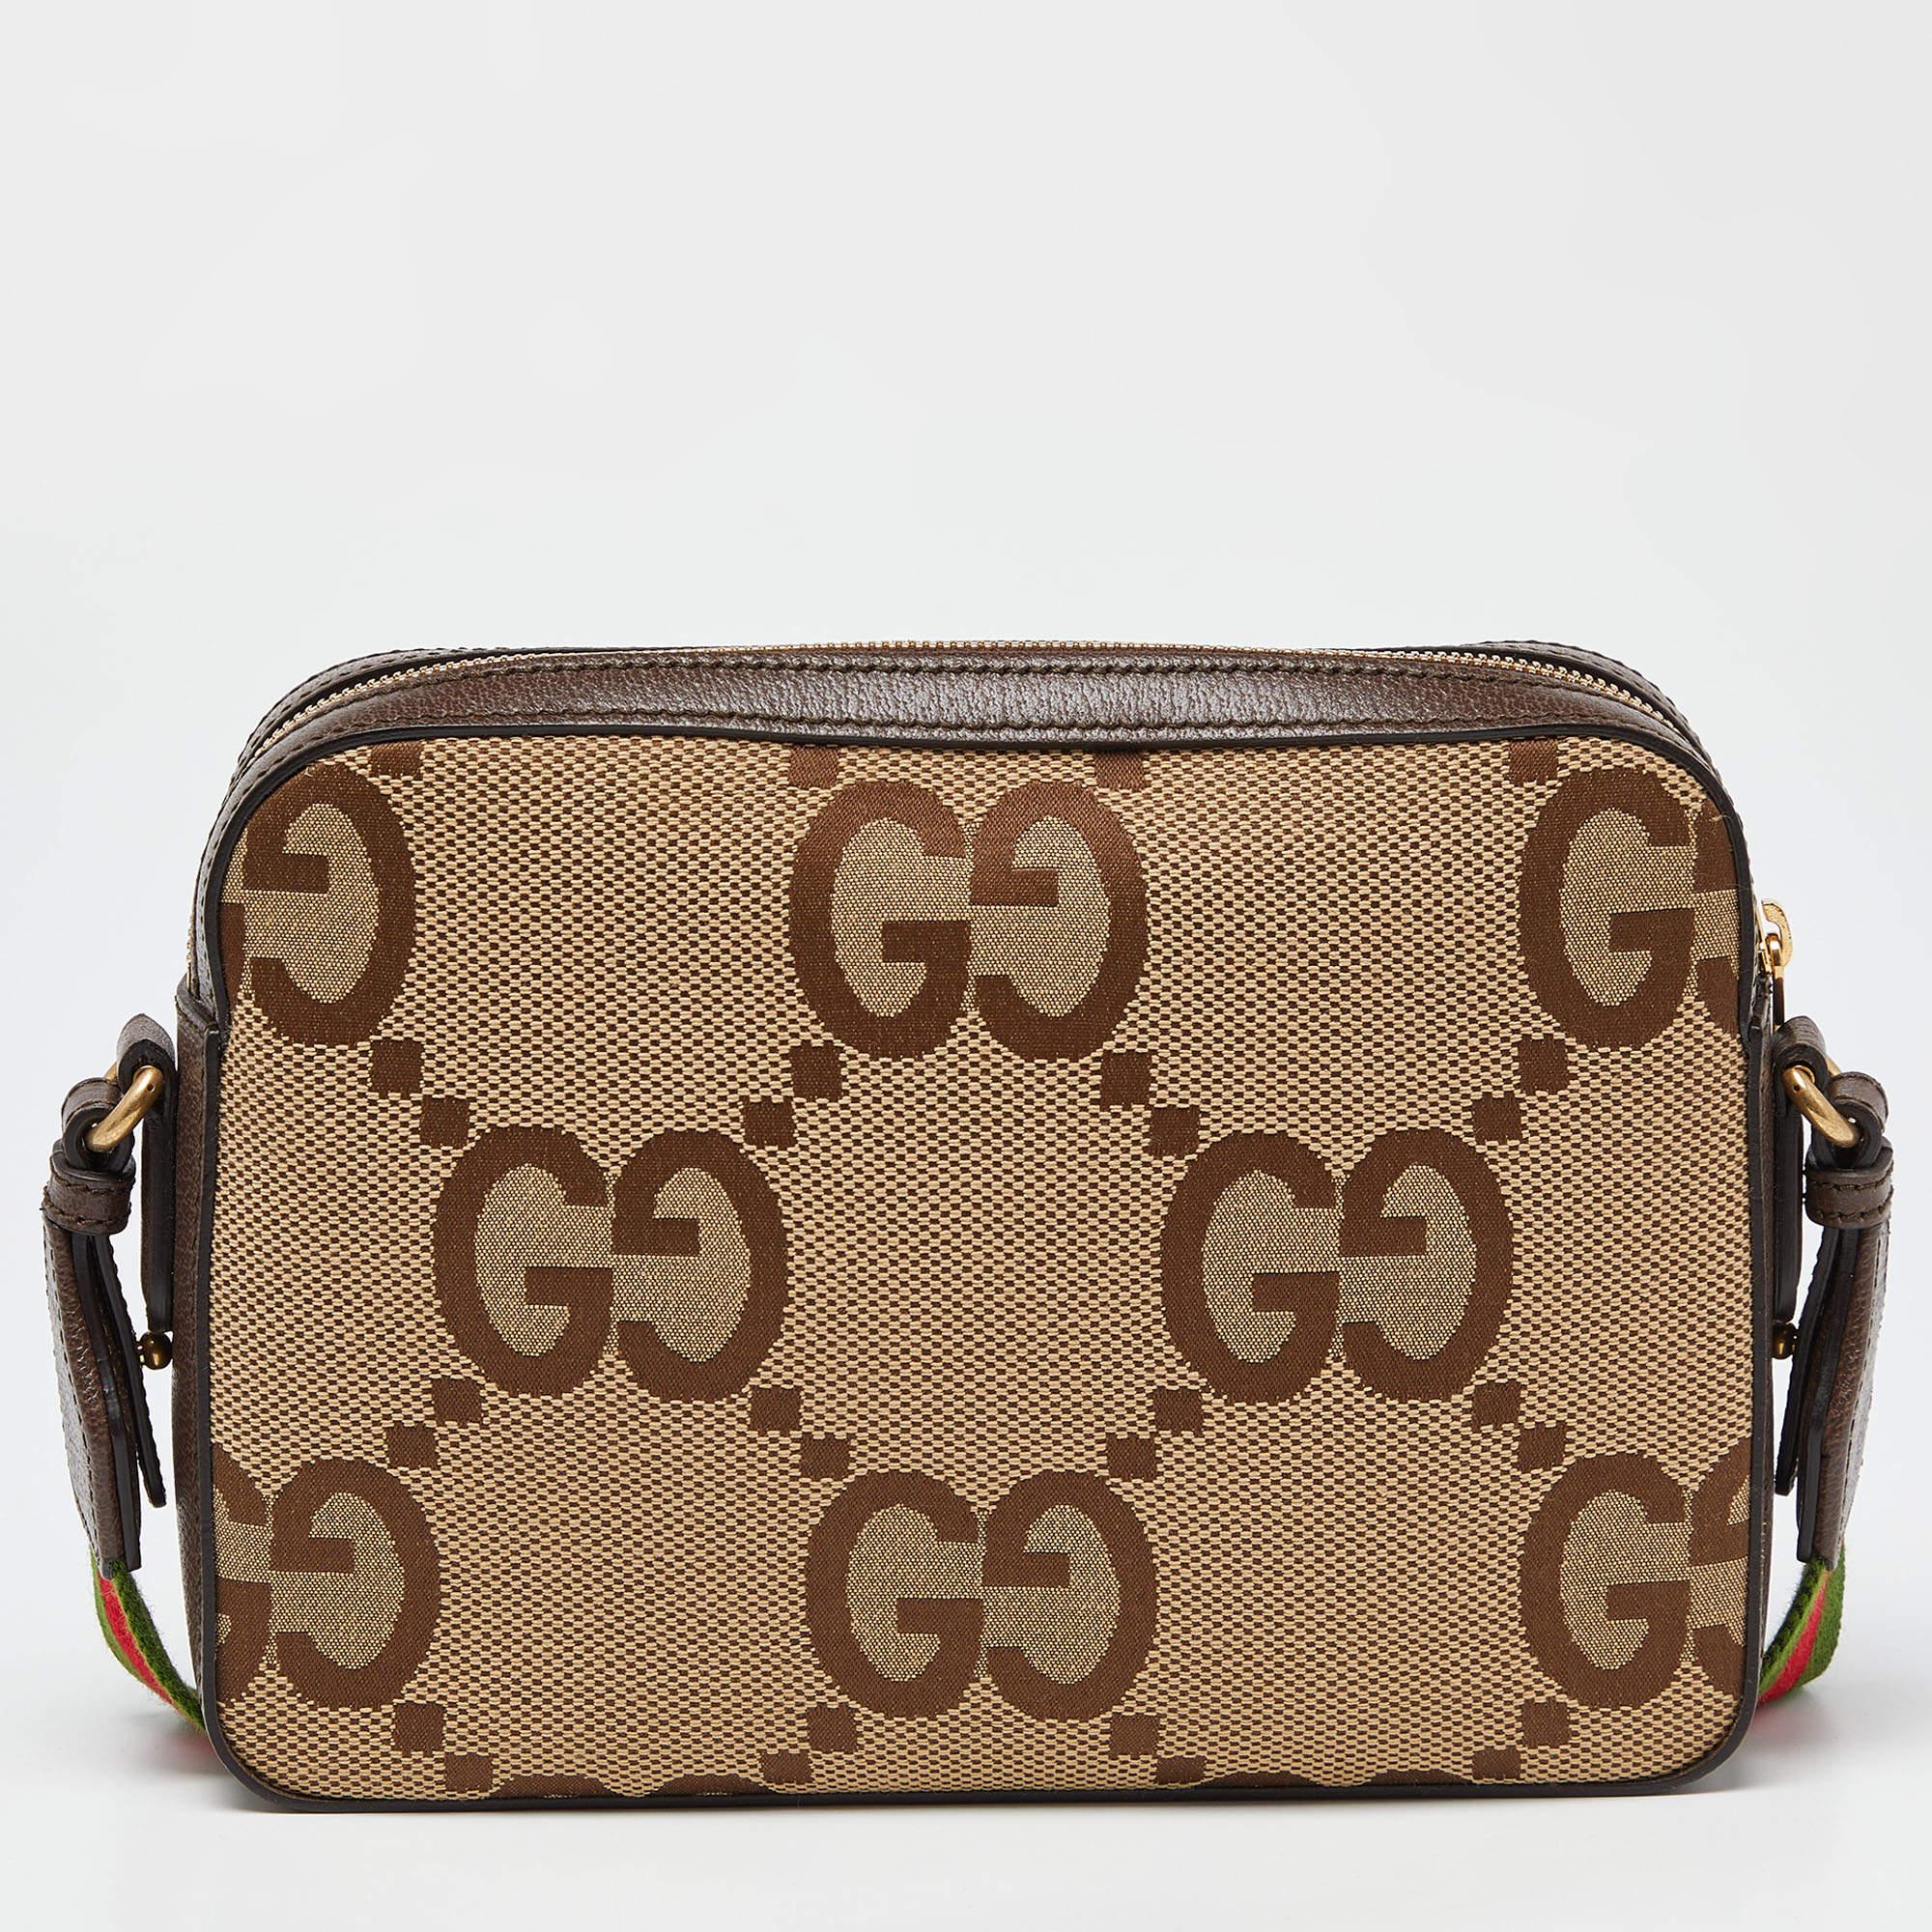 Gucci Beige/Brown Jumbo GG Canvas and Leather Mesenger Bag 6